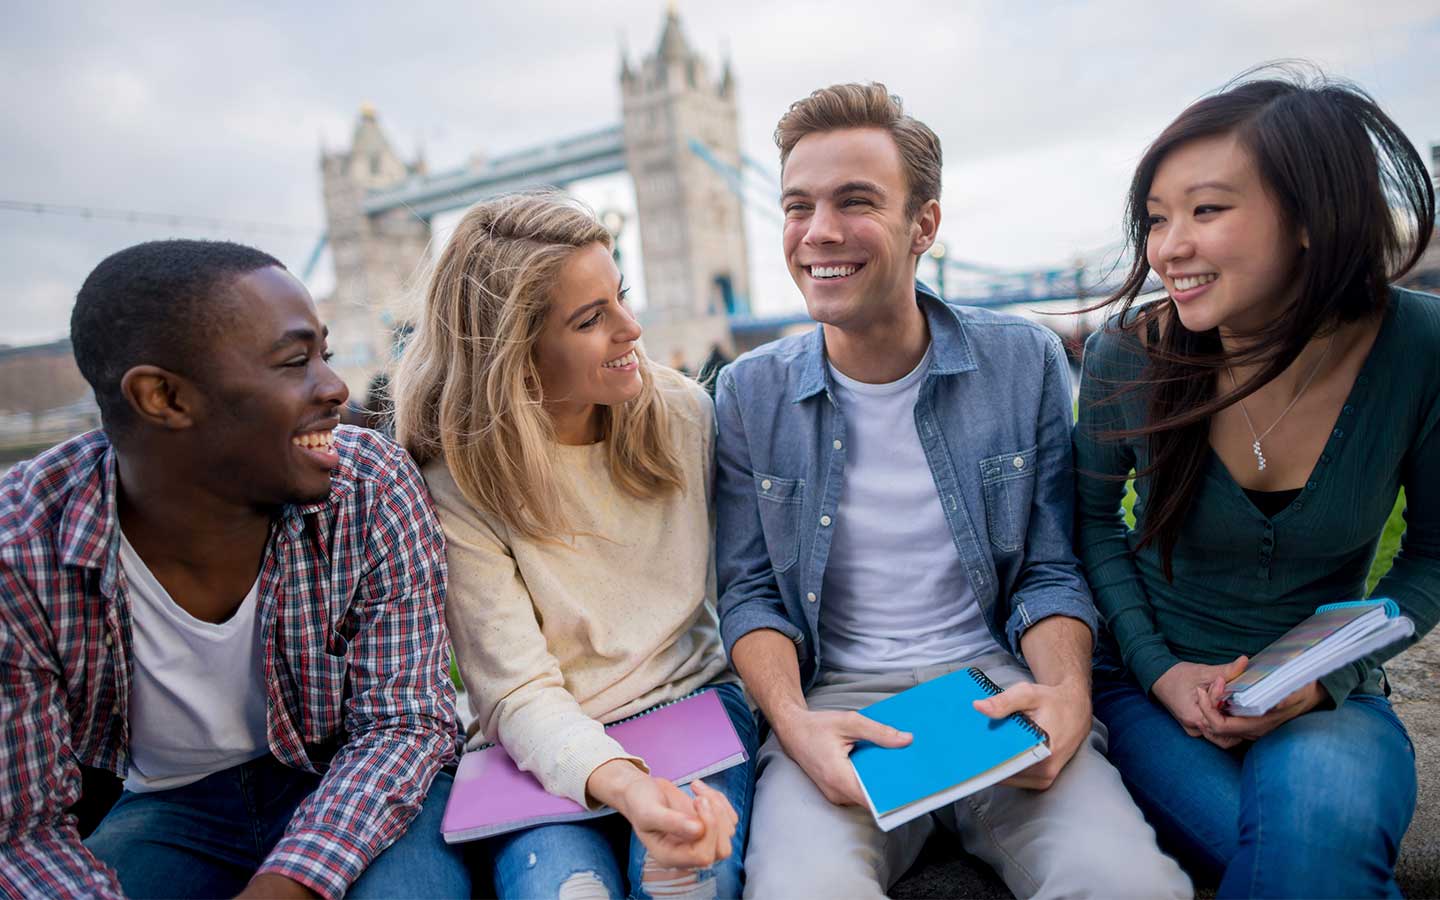 HOW TO ENHANCE YOUR STUDY ABROAD EXPERIENCE